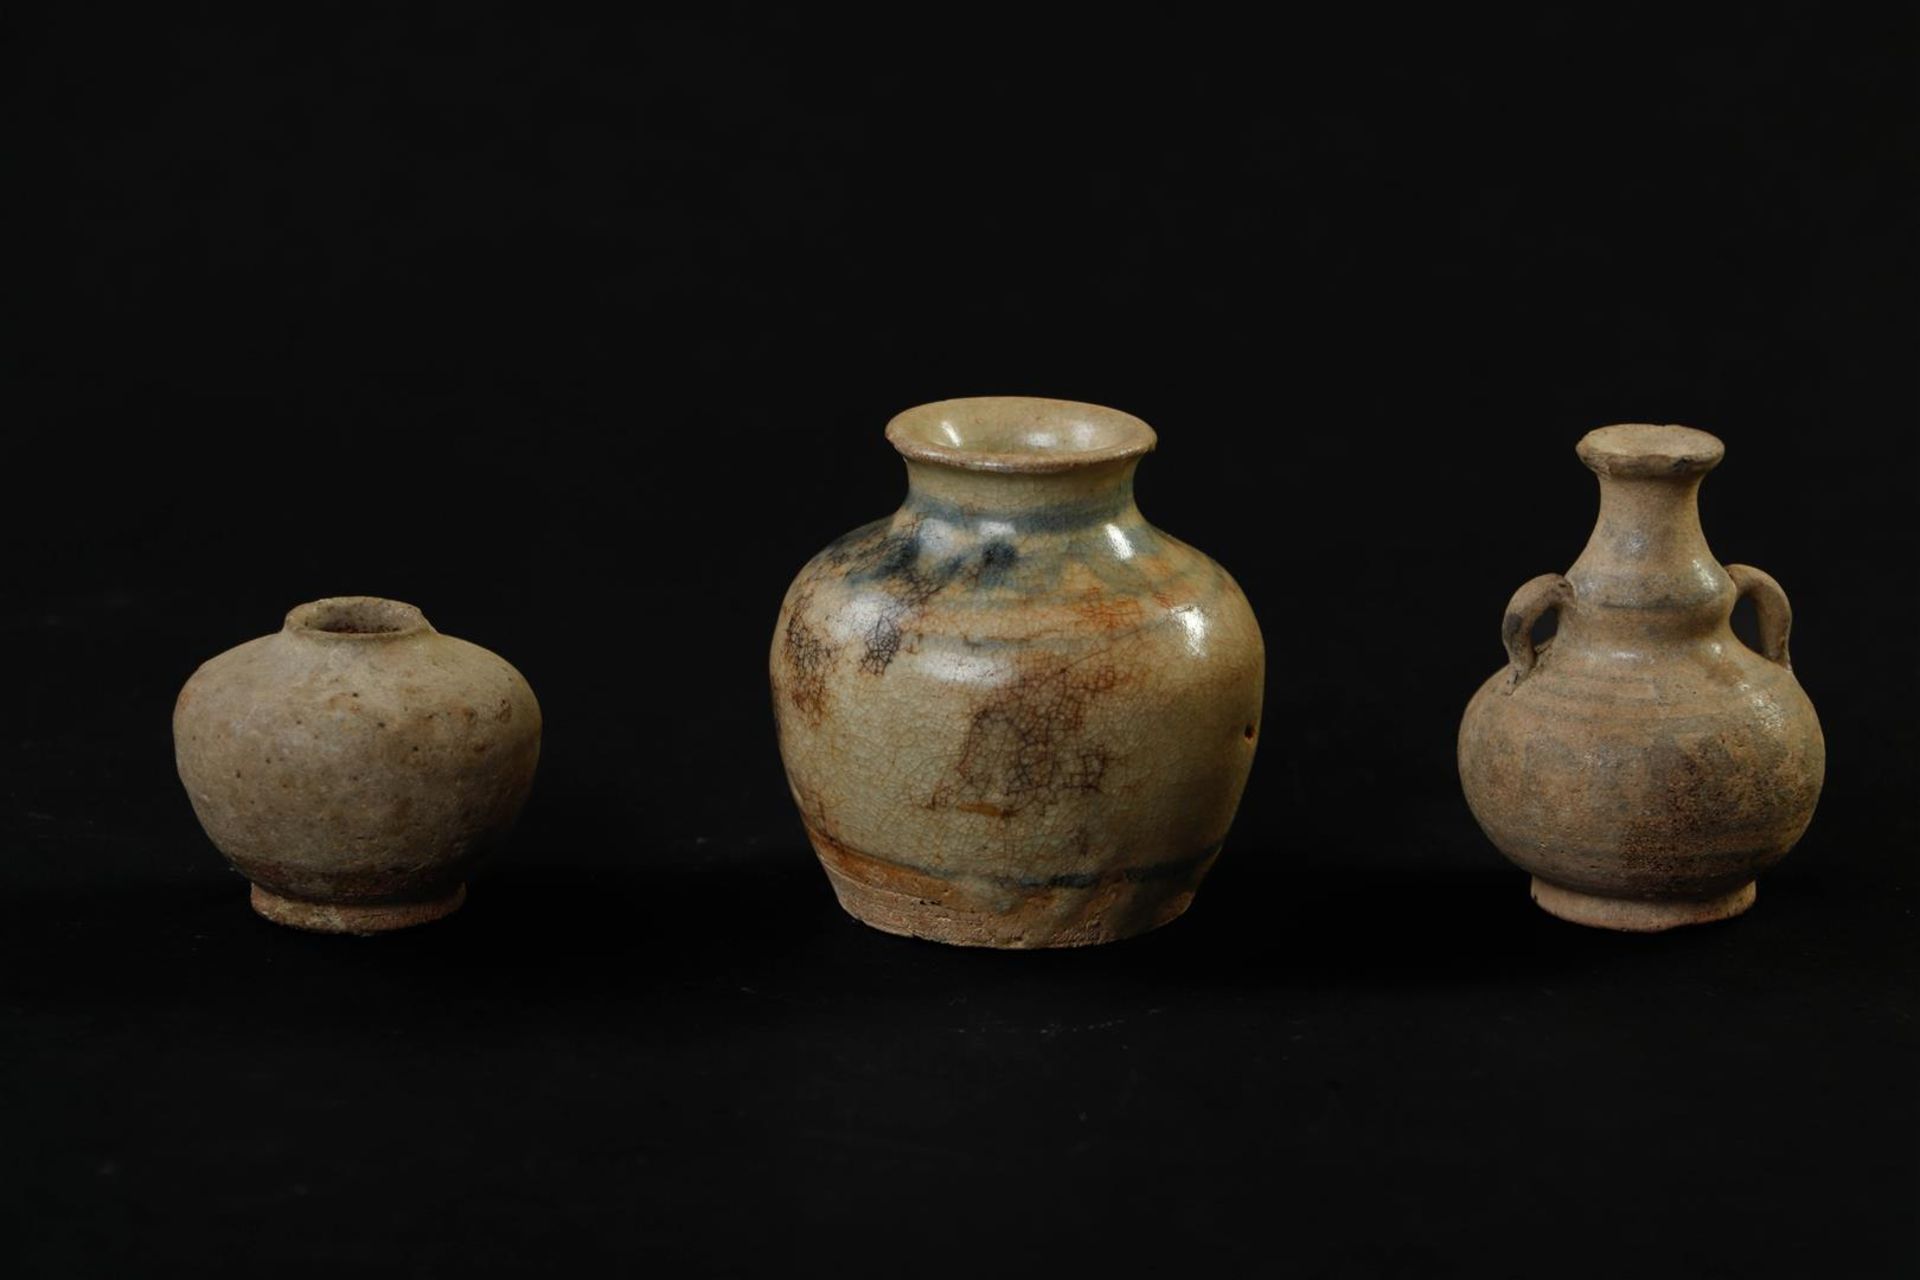 Lot of two ointment jars and a gourd model with ears, Ming period.
H. 9 cm. - Image 2 of 4